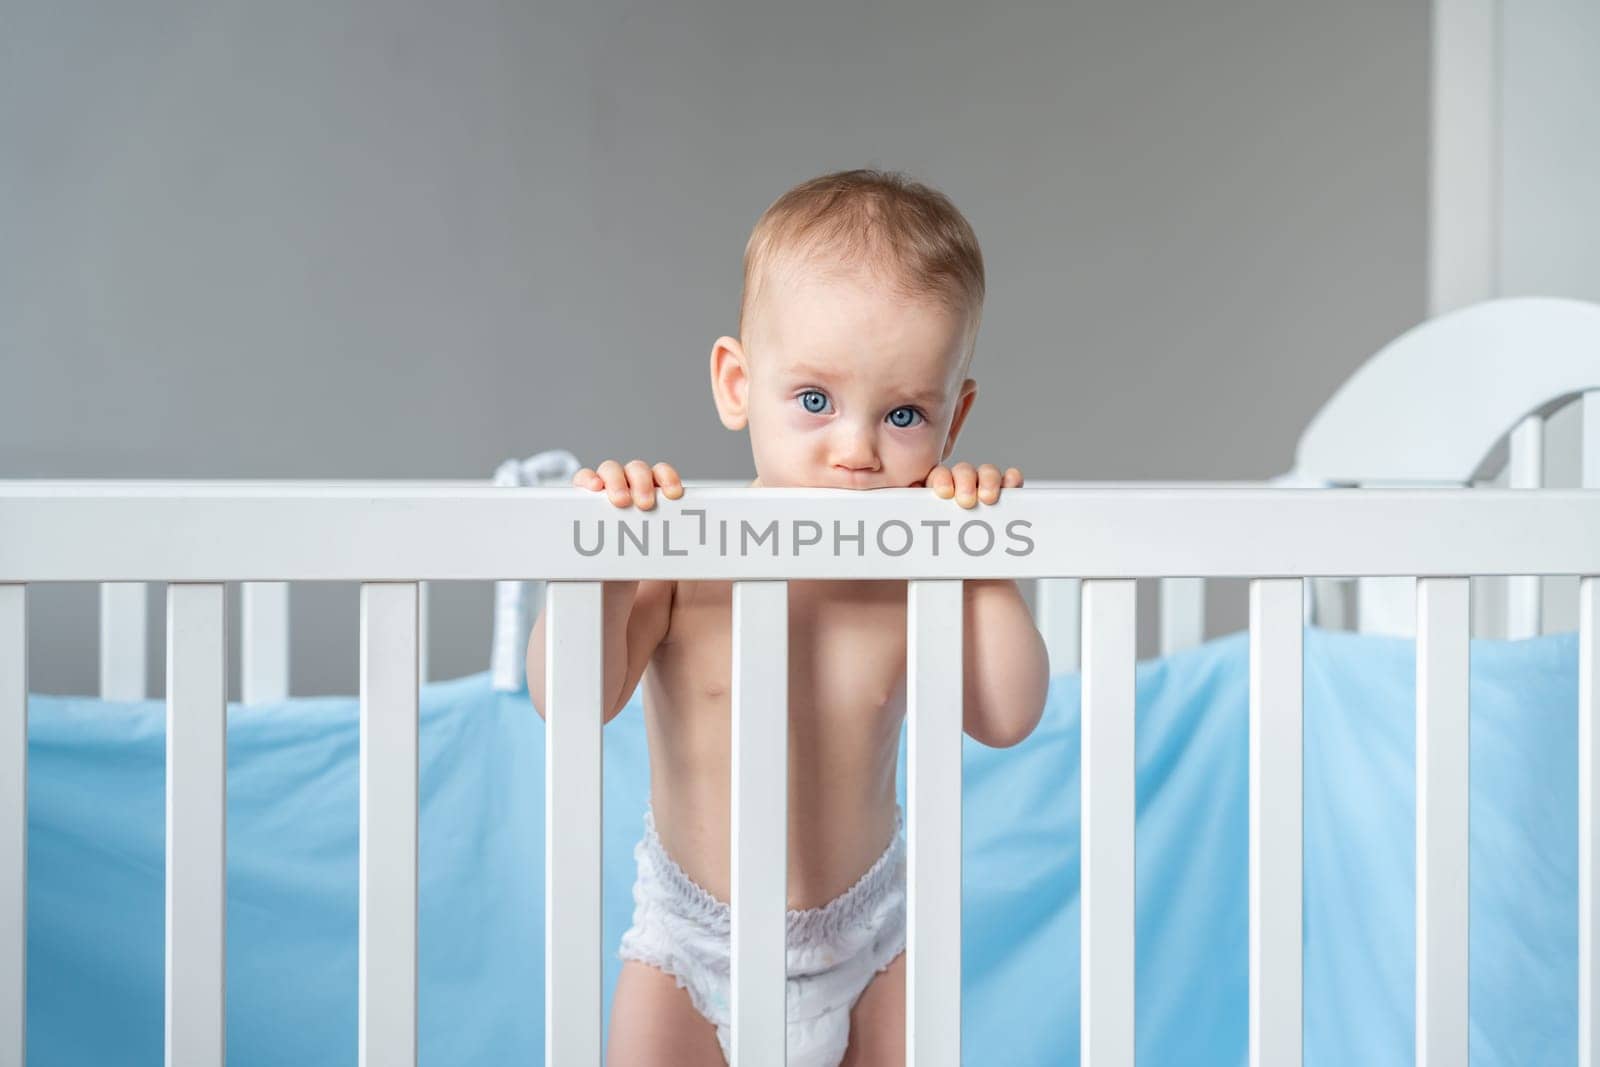 A baby in a diaper cutely bit the back of a wooden crib.